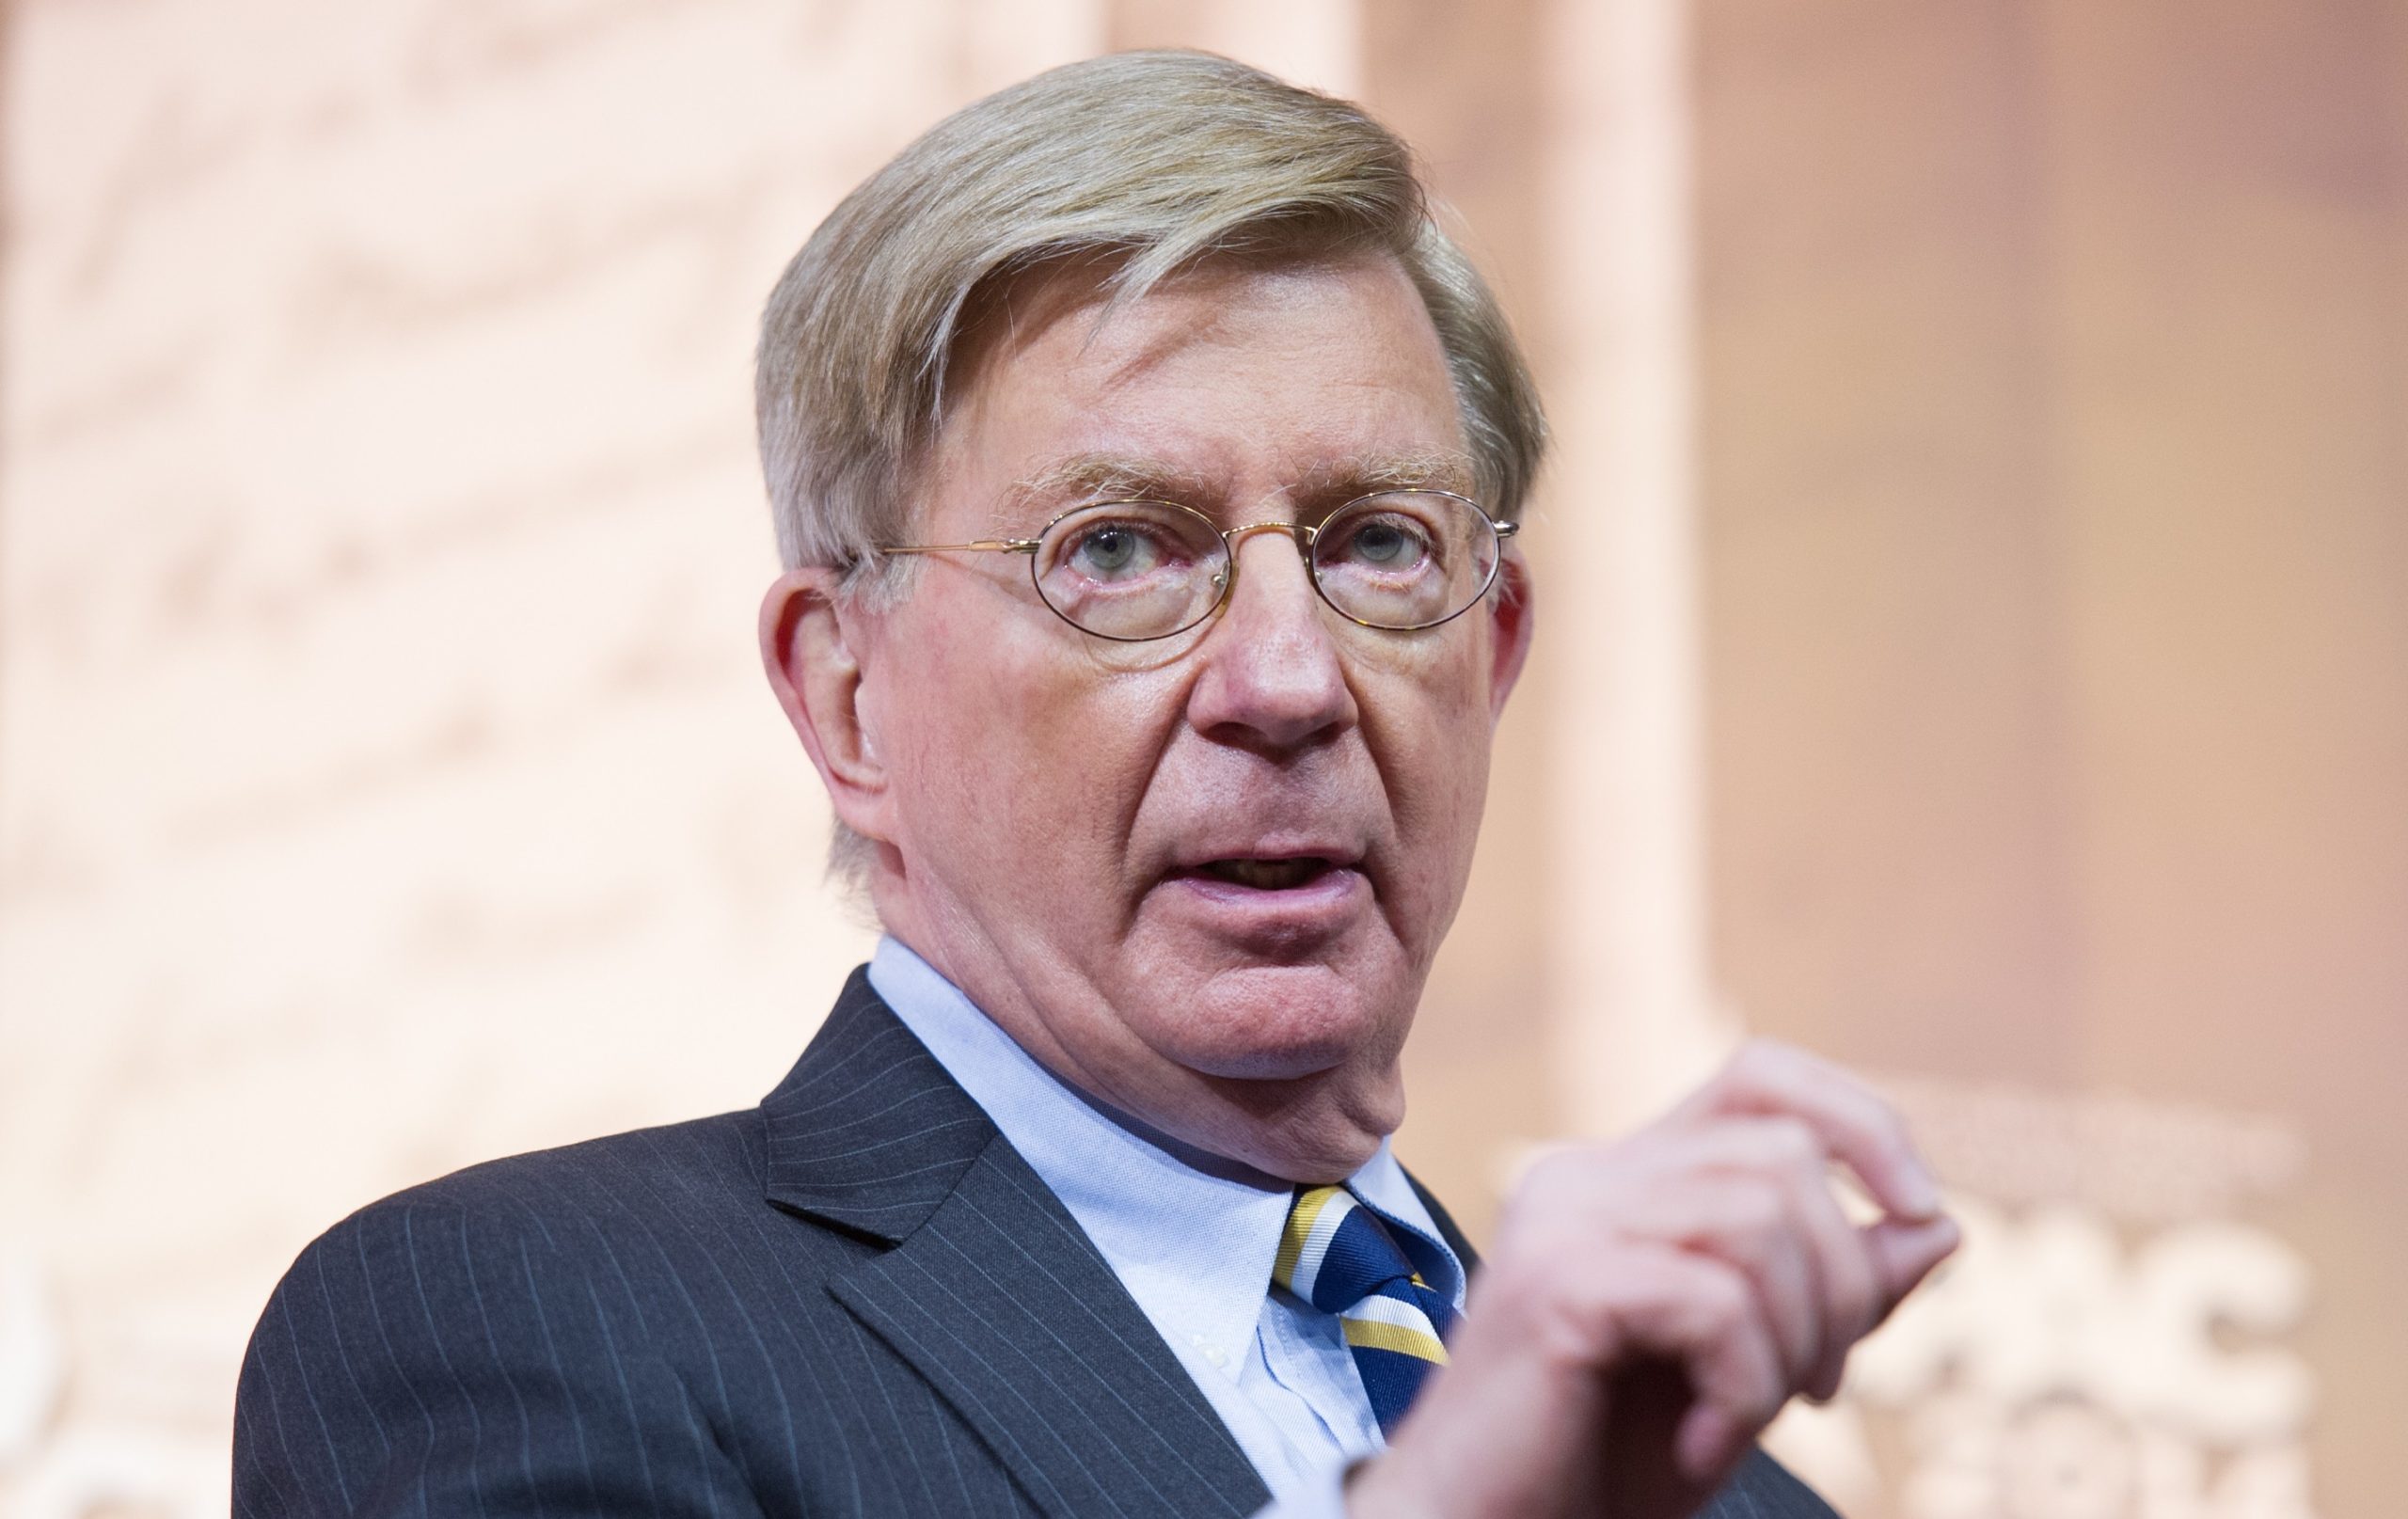 George Will’s “conservatism”